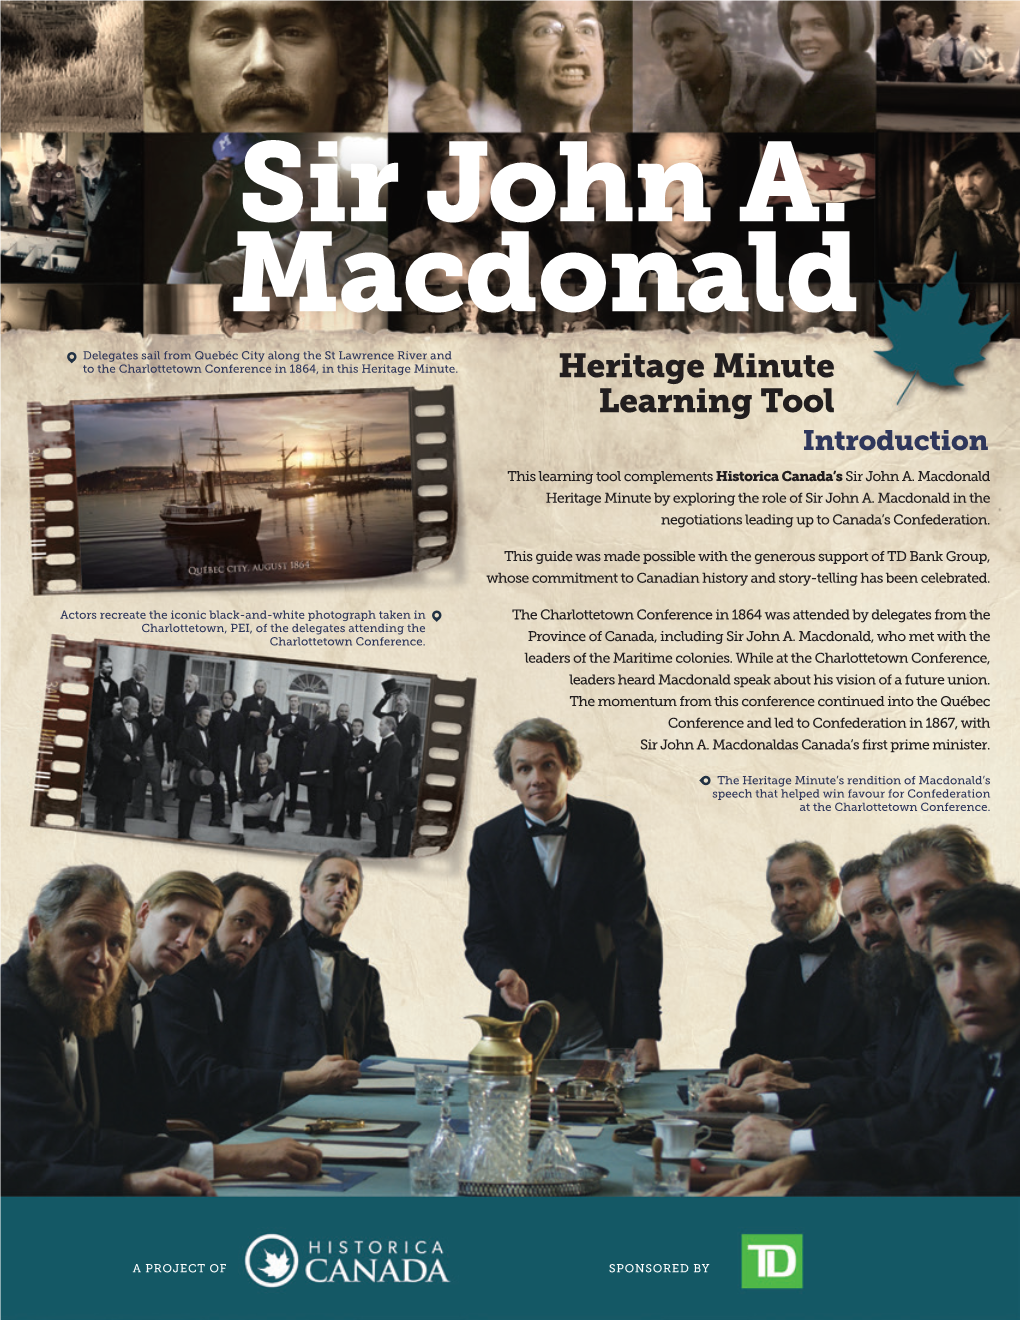 Sir John A. Macdonald Delegates Sail from Quebéc City Along the St Lawrence River and to the Charlottetown Conference in 1864, in This Heritage Minute